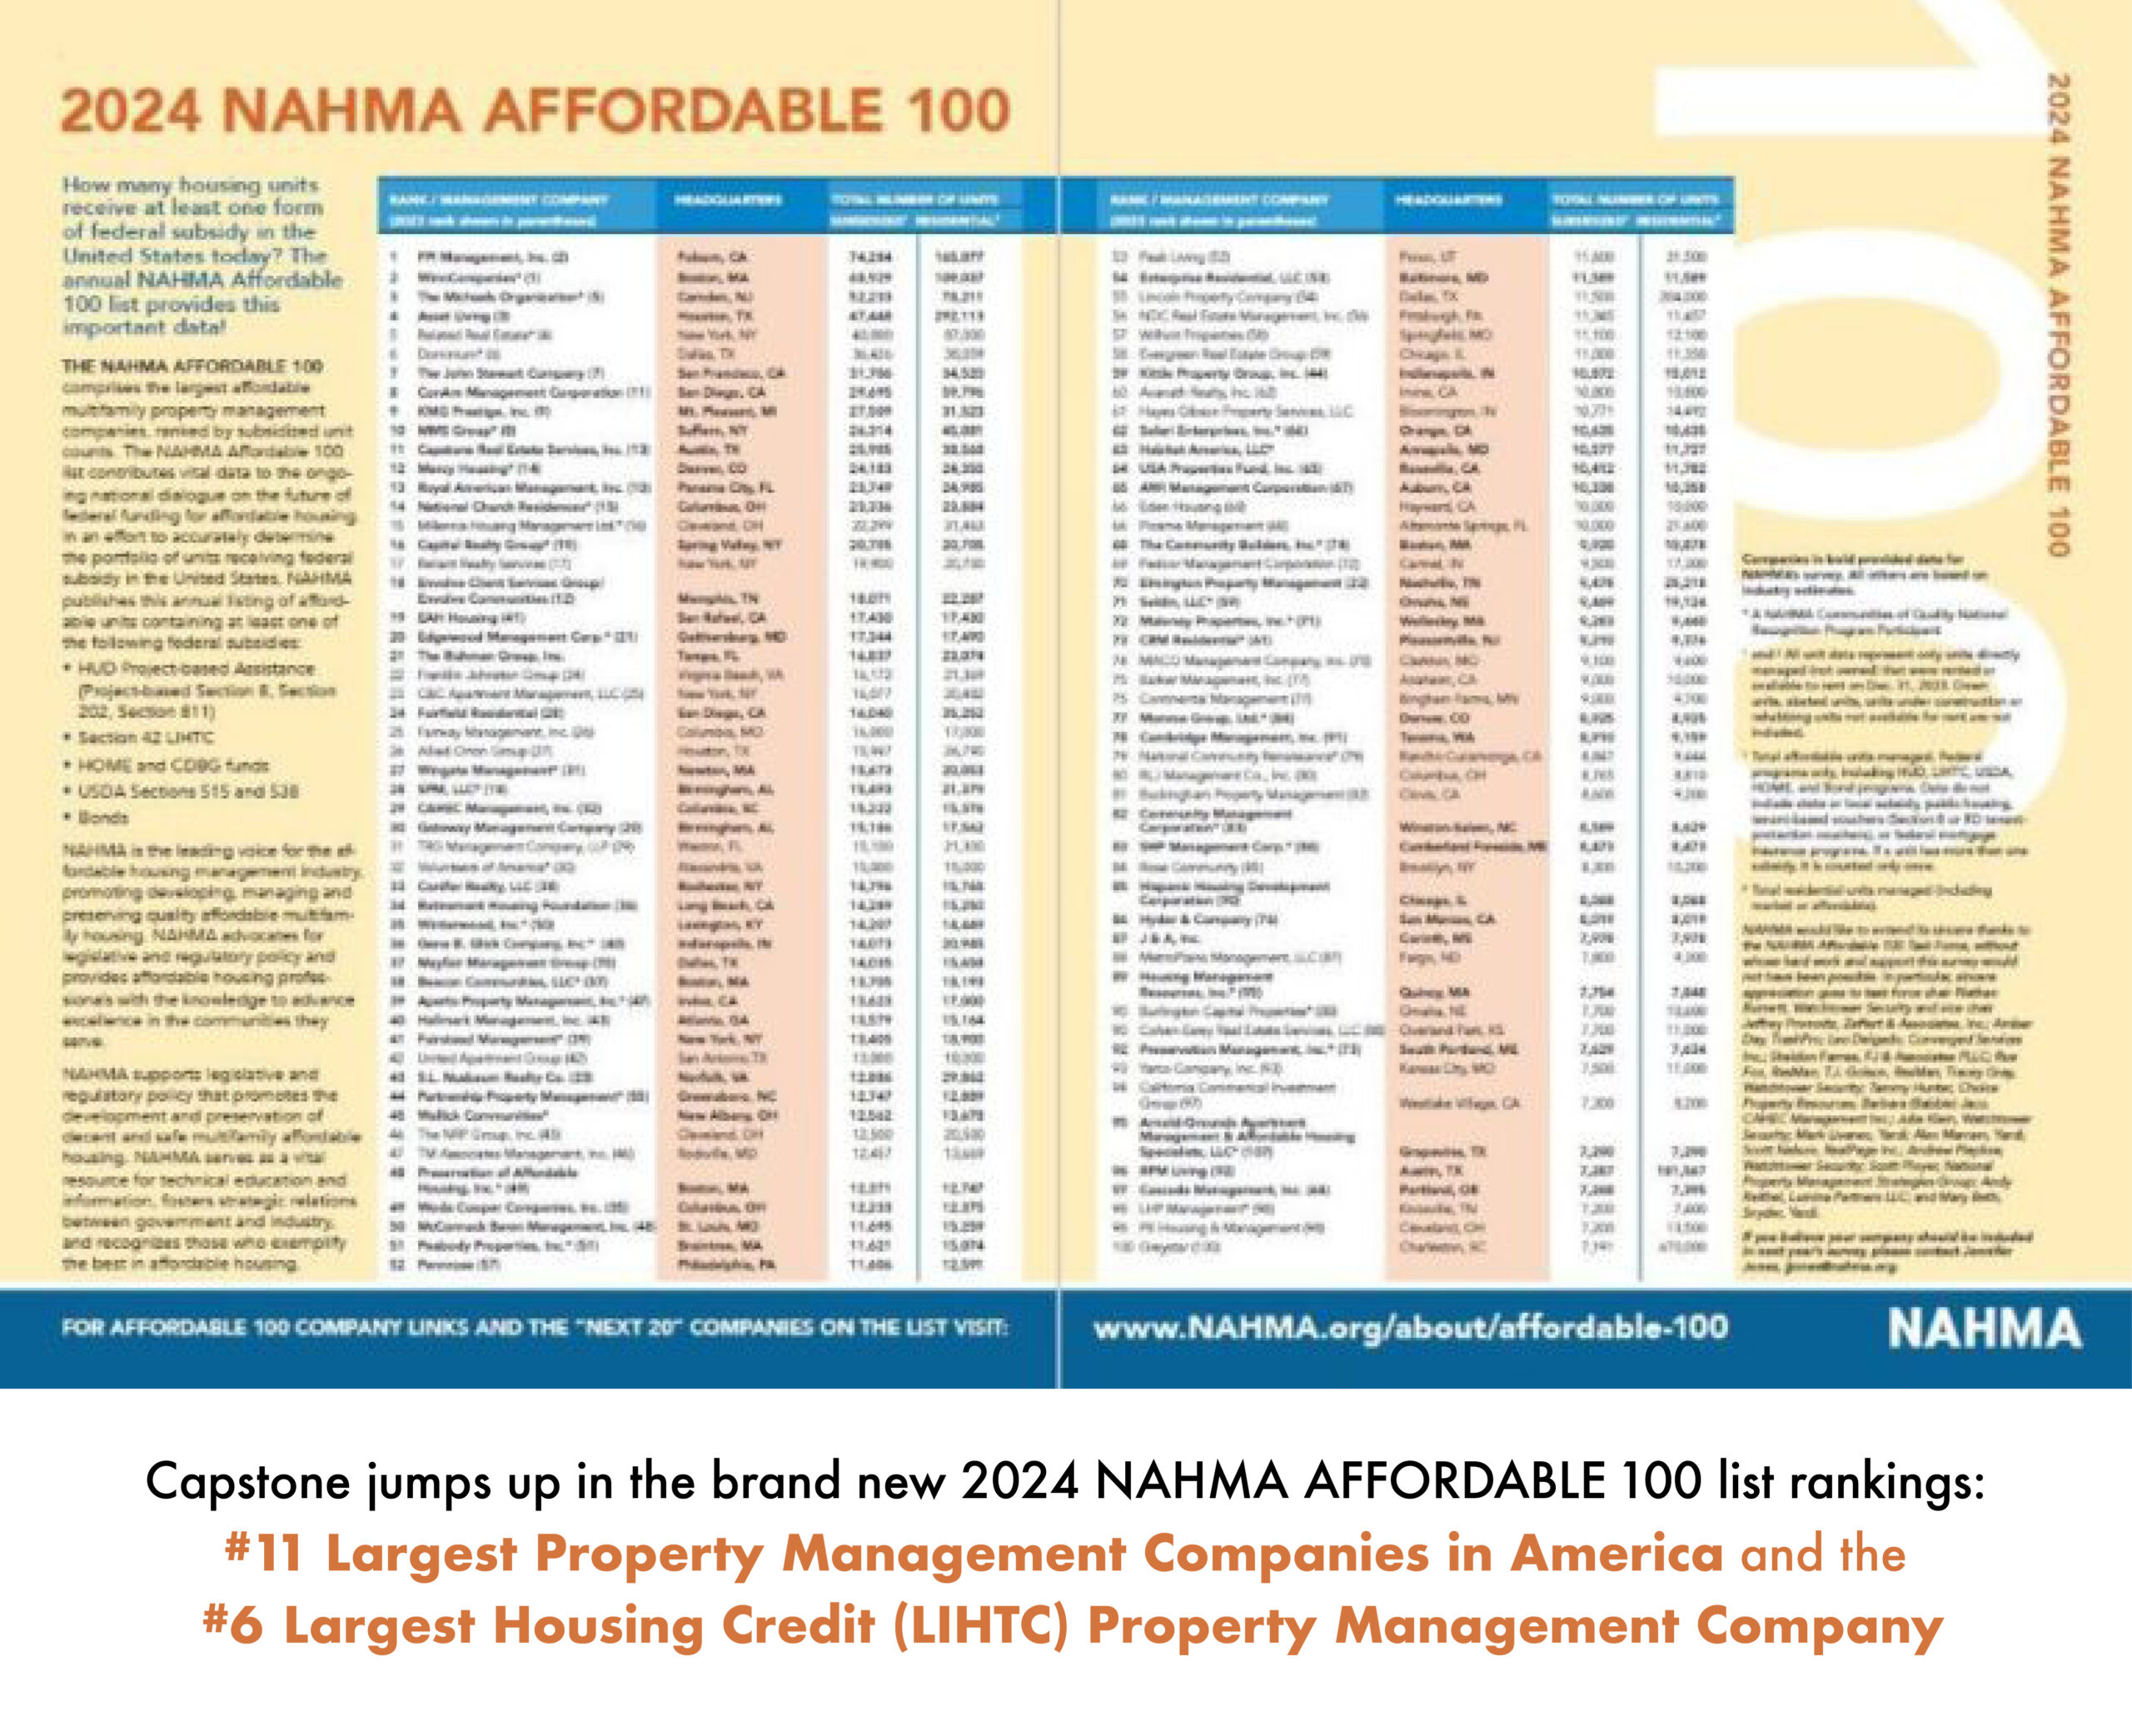 The NAHMA Affordable 100 comprises the largest affordable multifamily property management companies, ranked by affordable unit counts.